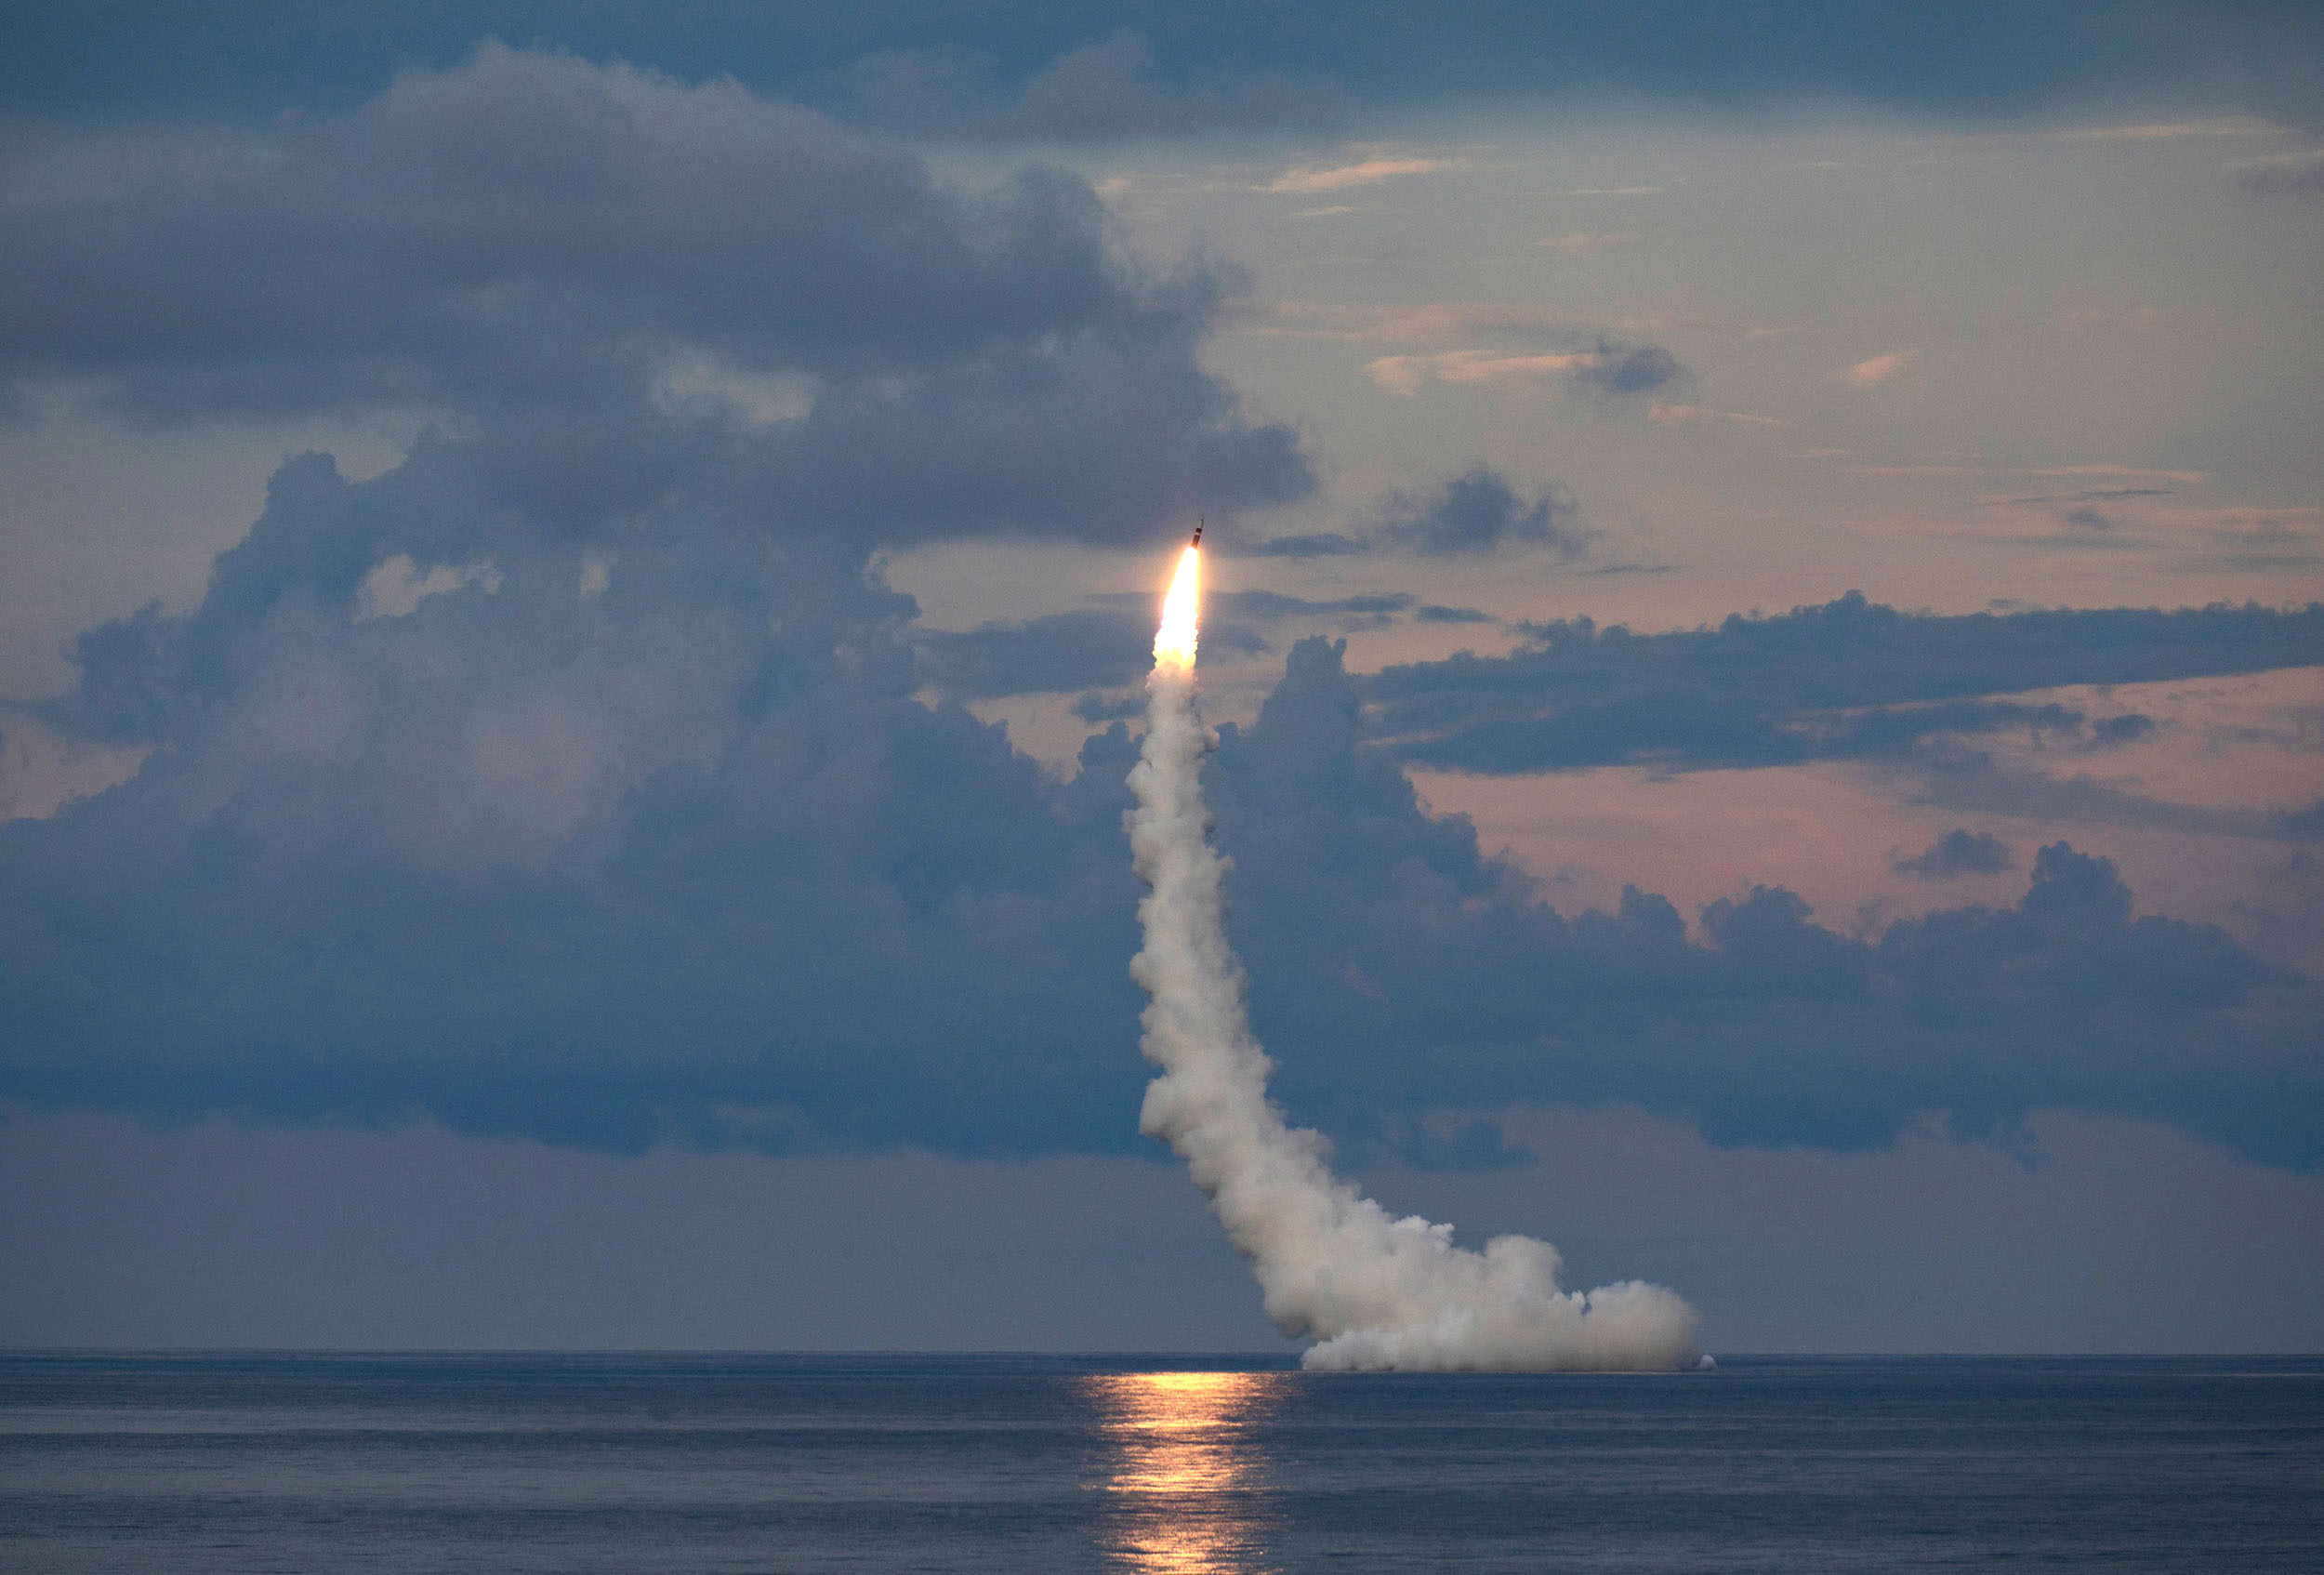 Image that shows the US Navy conducting a scheduled, two-missile test flight of unarmed life-extended Trident II (D5LE) missiles from USS Wyoming (SSBN-742), an Ohio-class ballistic missile submarine, on the Eastern Test Range off the coast of Cape Canaveral, Florida, Sept. 17, 2021. Despite being scheduled, the nuclear ballistic missile submarines comes as the US has penned a deal to work with the UK to build nuclear-powered submarines for Australia. (Photo by EyePress News / EyePress via AFP)